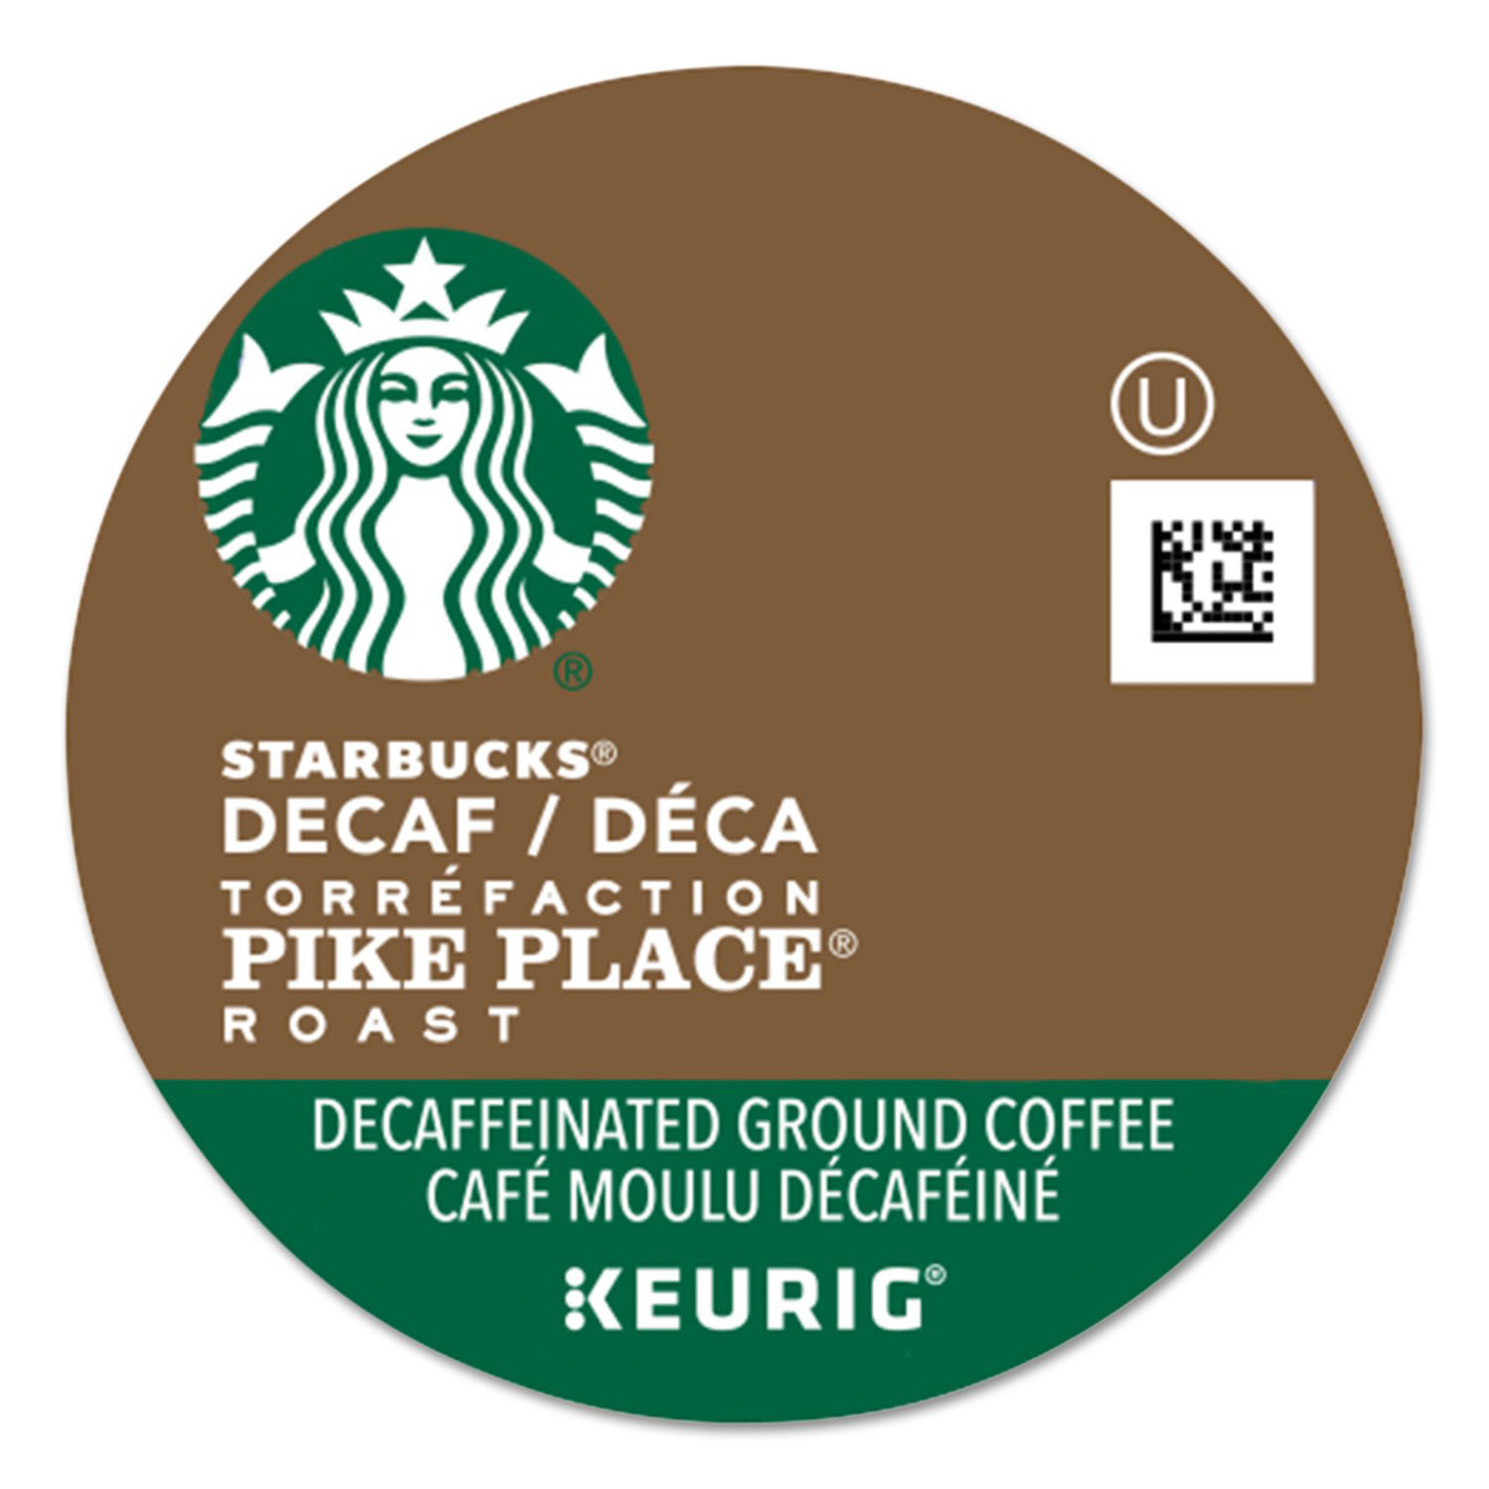 Starbucks K-Cup Coffee Pods—Medium Roast Coffee—Decaf Pike Place Roast—100% Arabica—4 boxes (96 pods total)